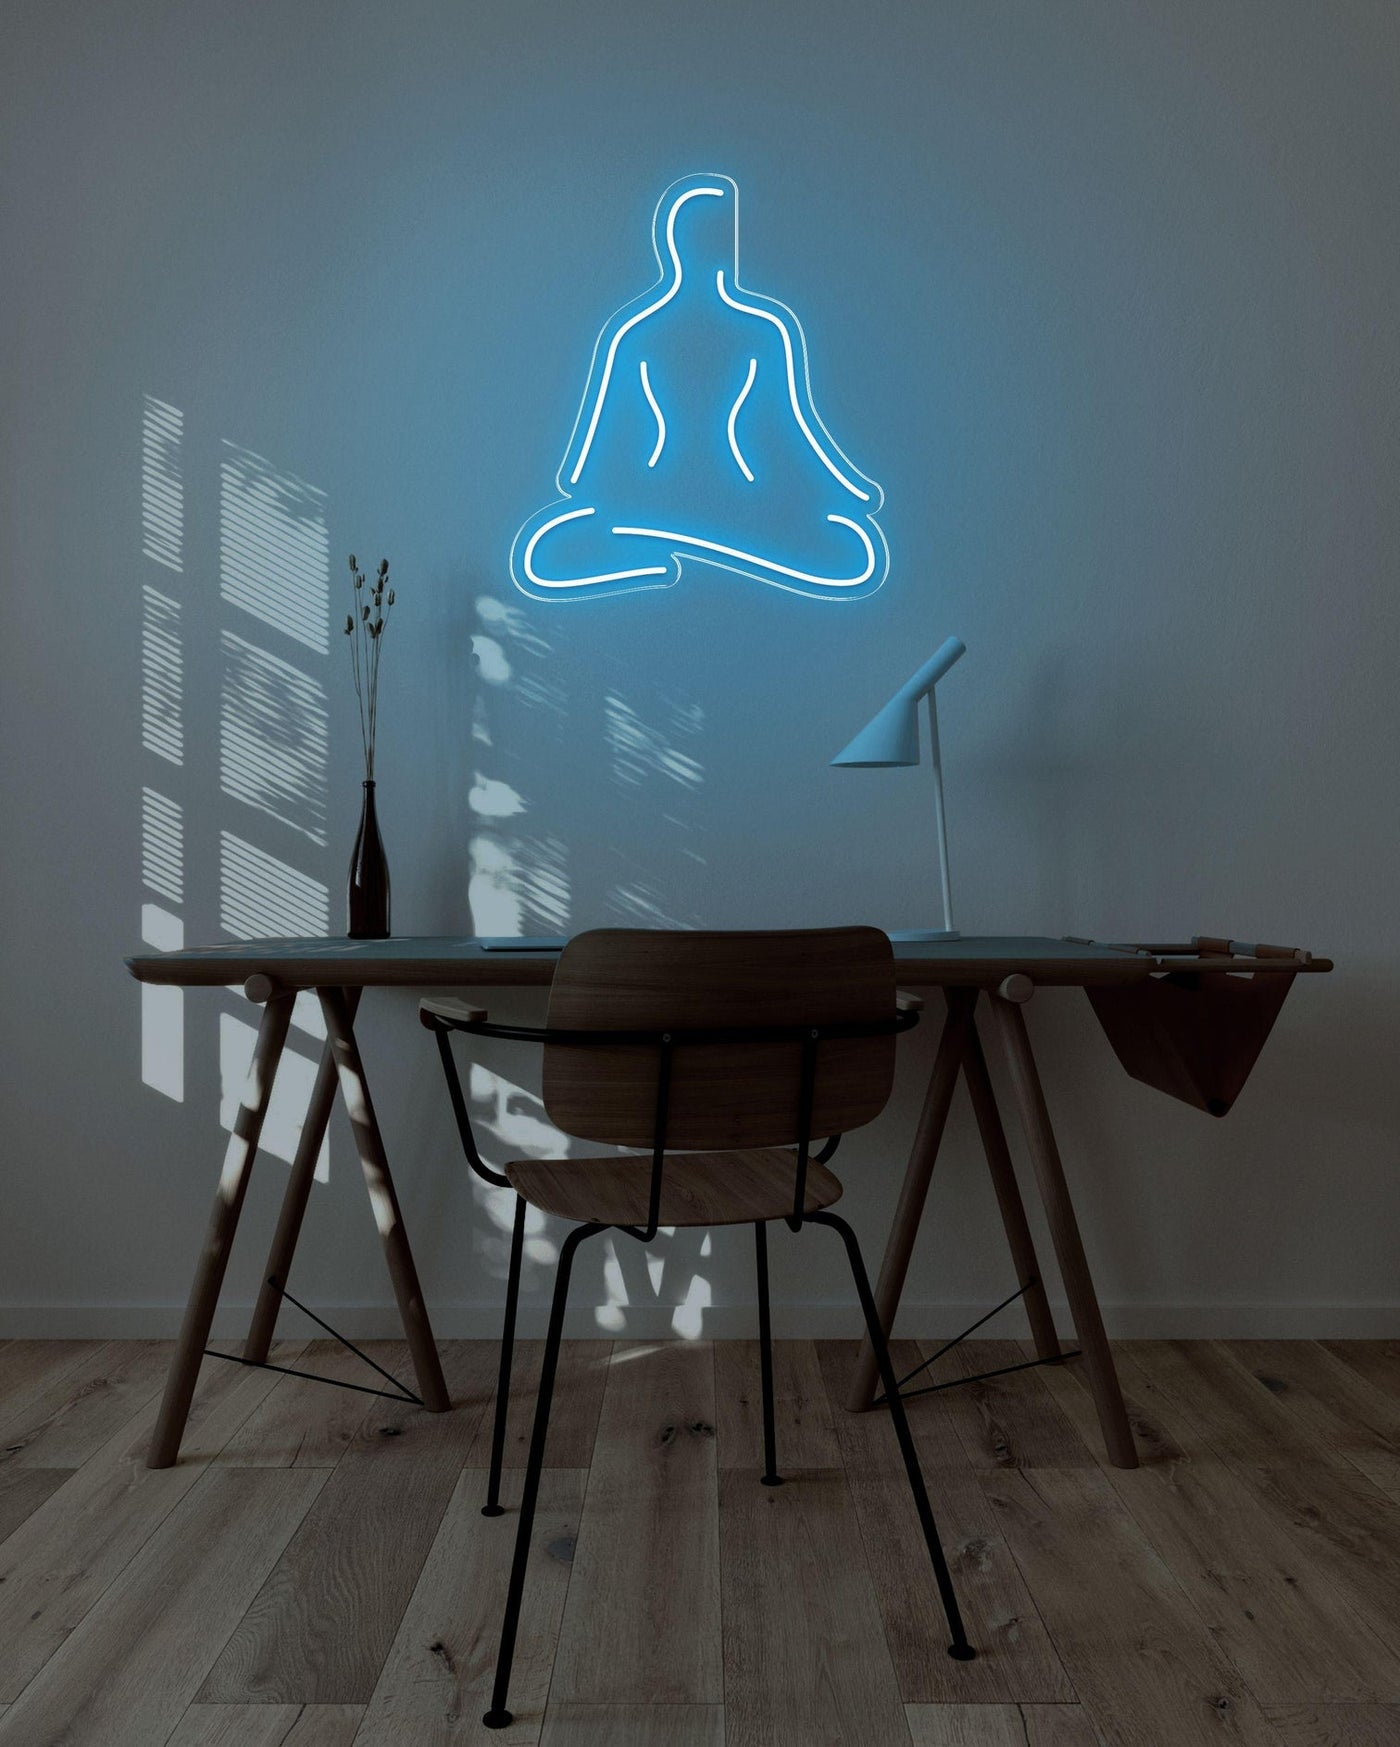 Meditate LED neon sign - 26inch x 29inchIce Blue